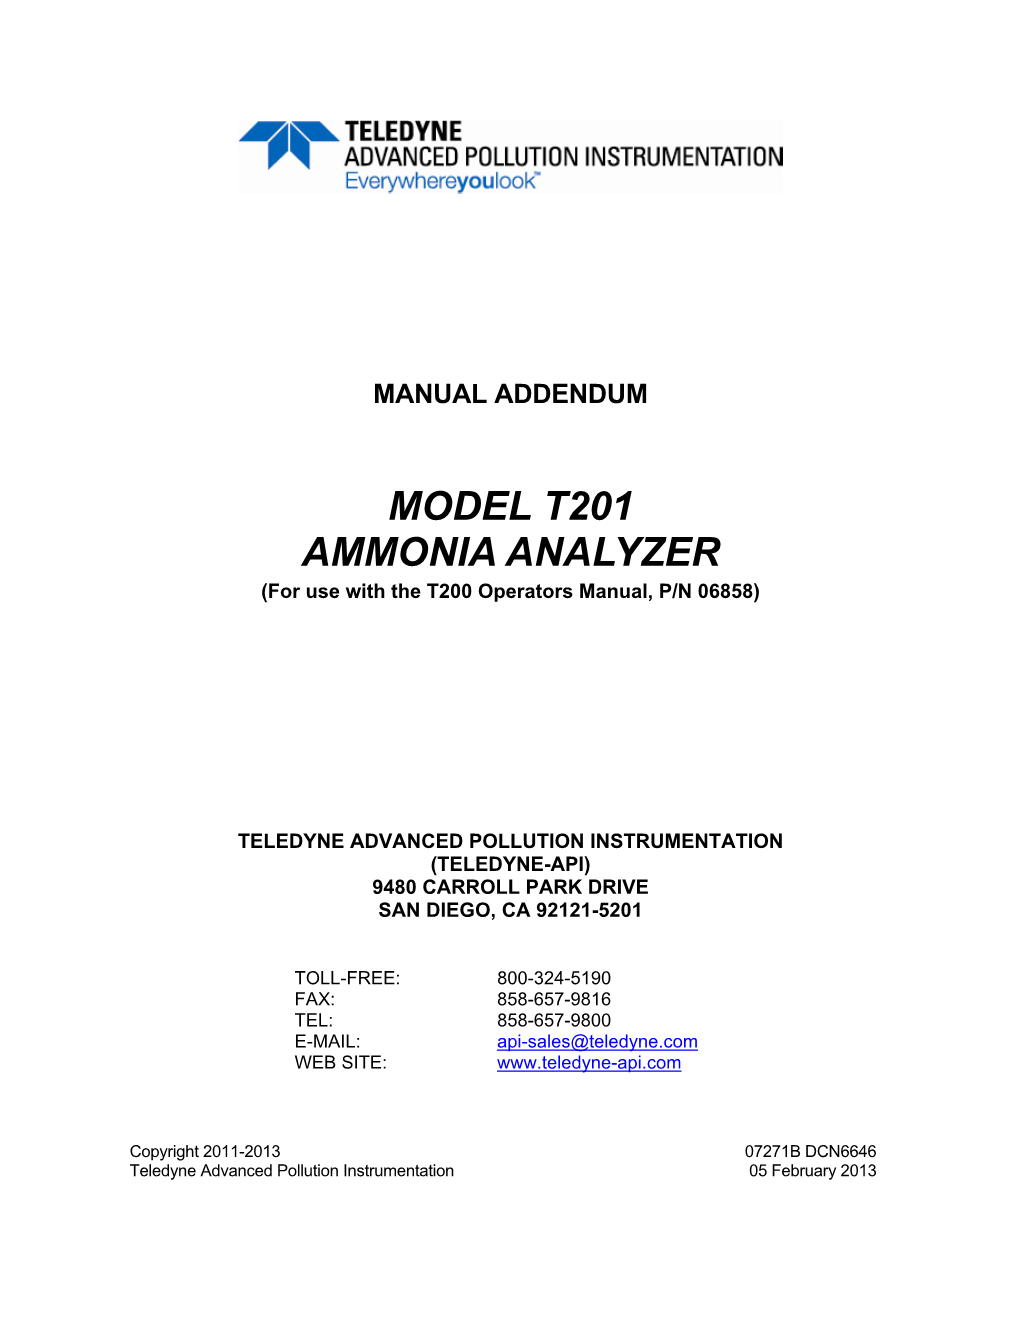 MODEL T201 AMMONIA ANALYZER (For Use with the T200 Operators Manual, P/N 06858)